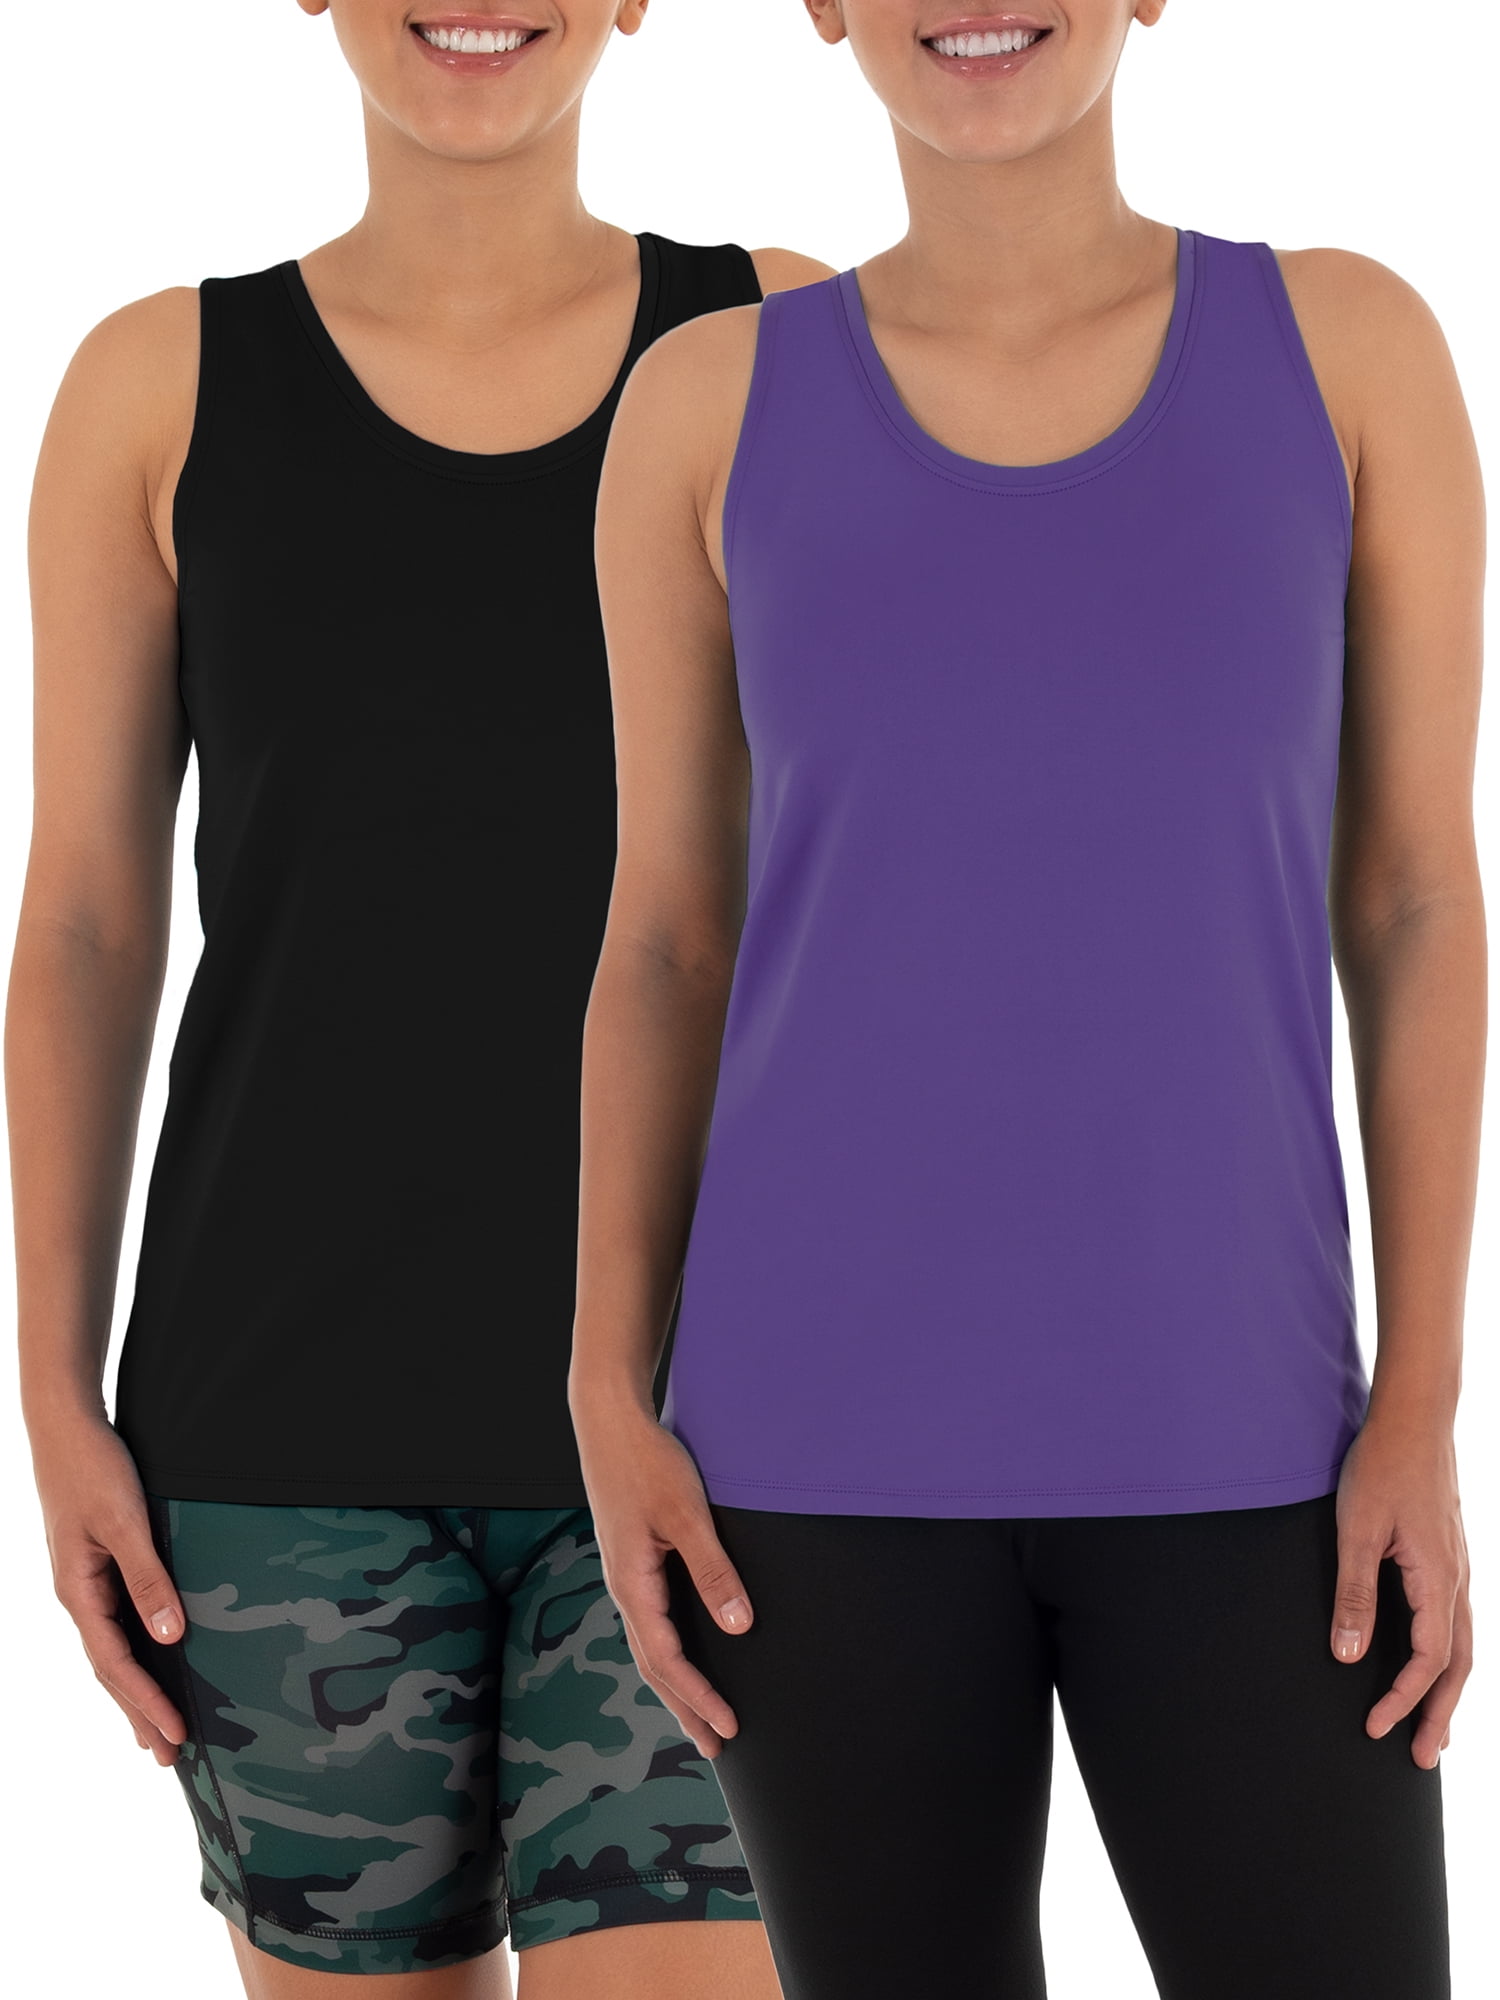 Camping Racerback Suns Out Buns Out Women's Tank Grill Summer Pool